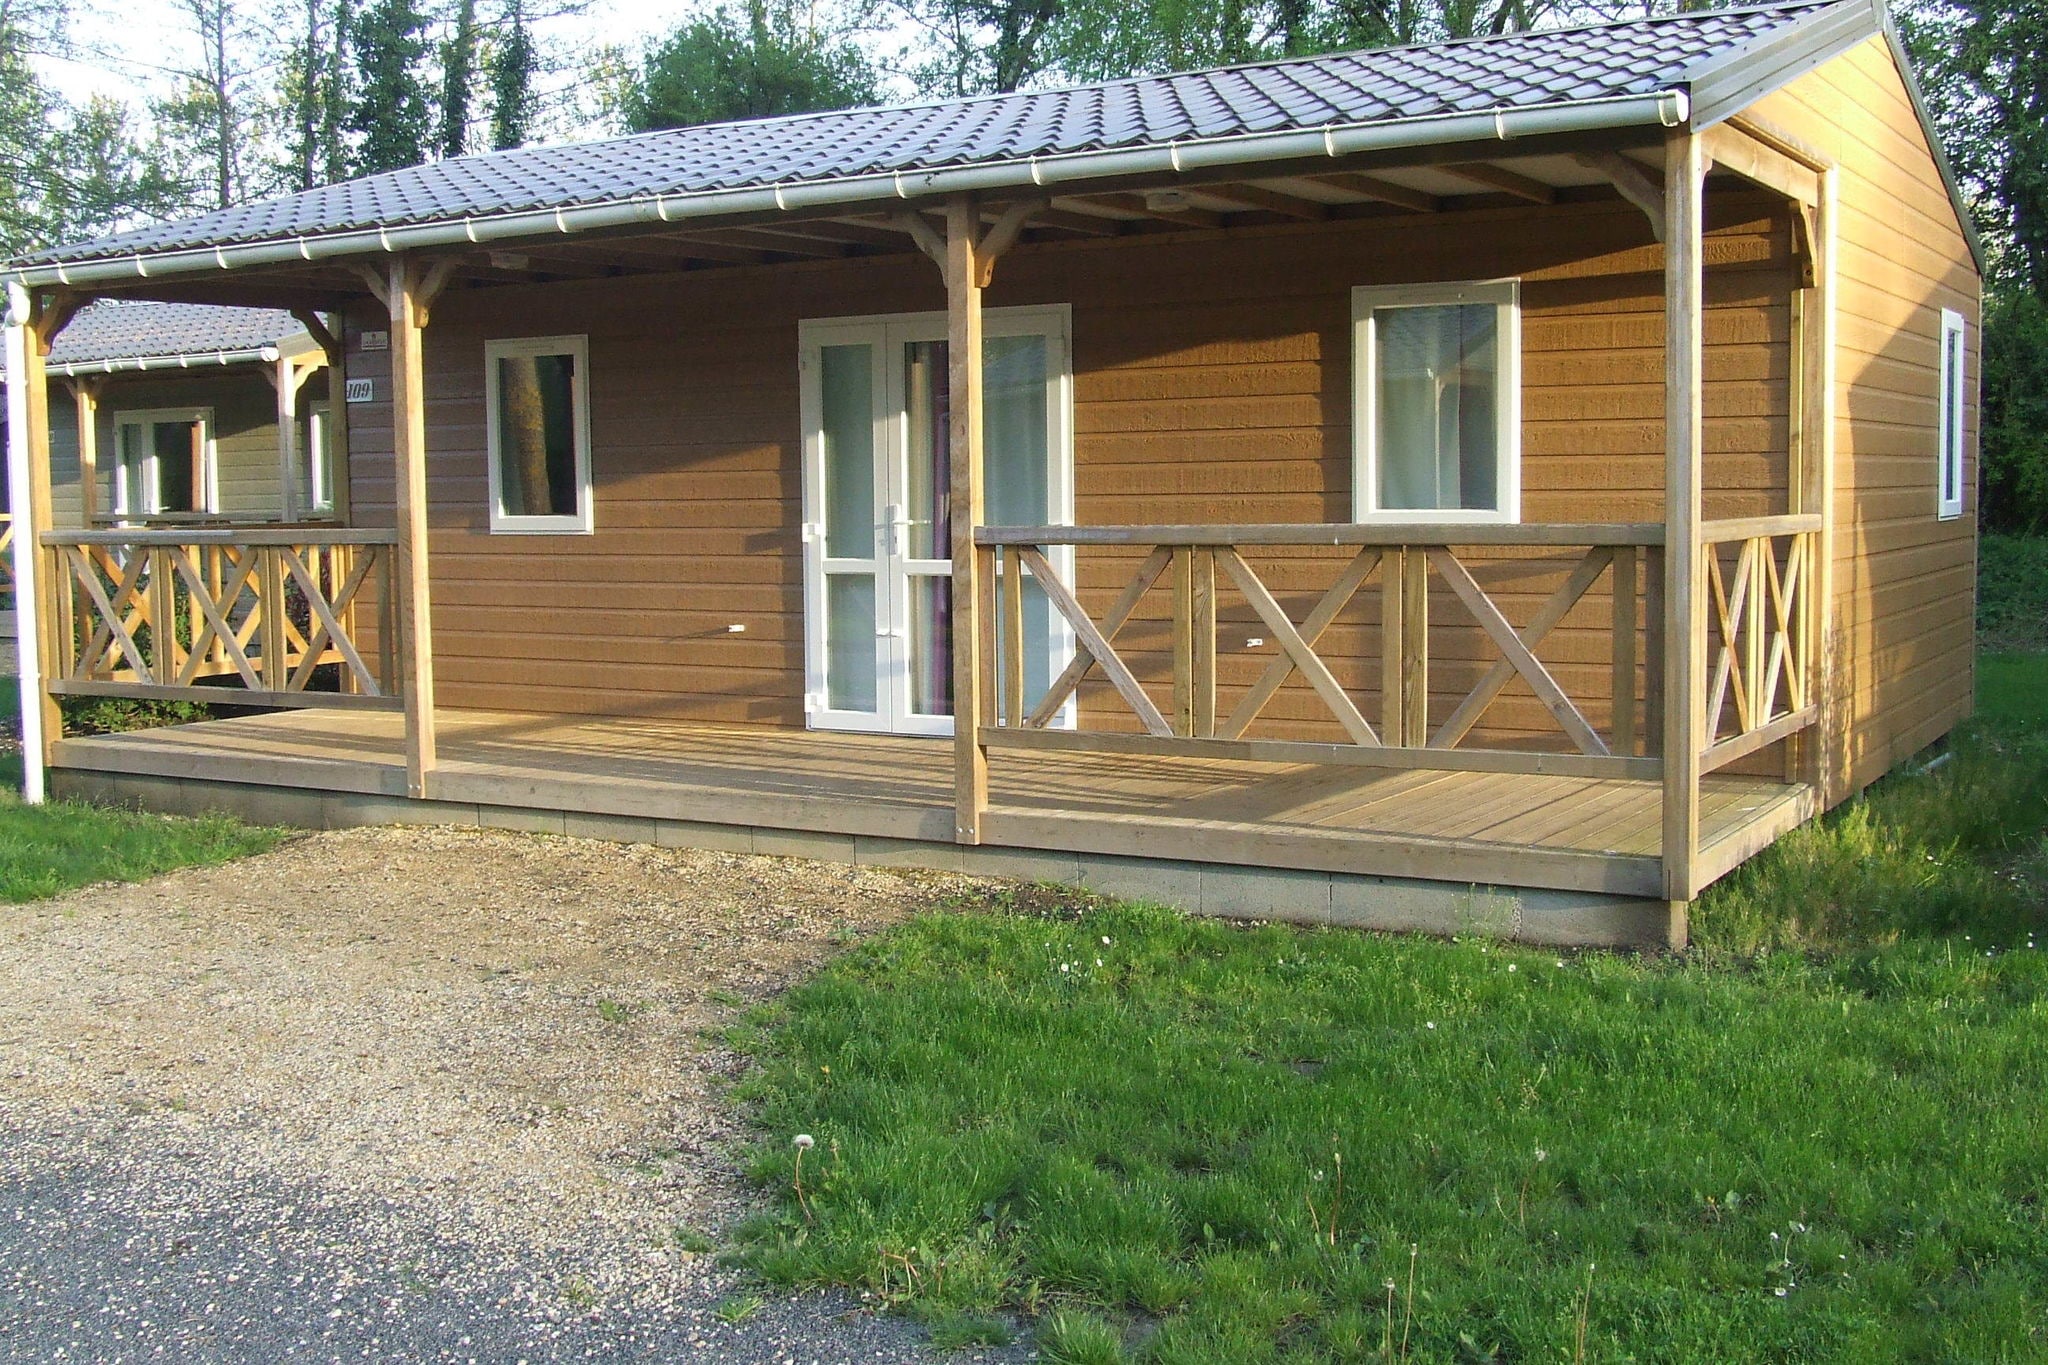 Detached chalet with dishwasher, located in natural region